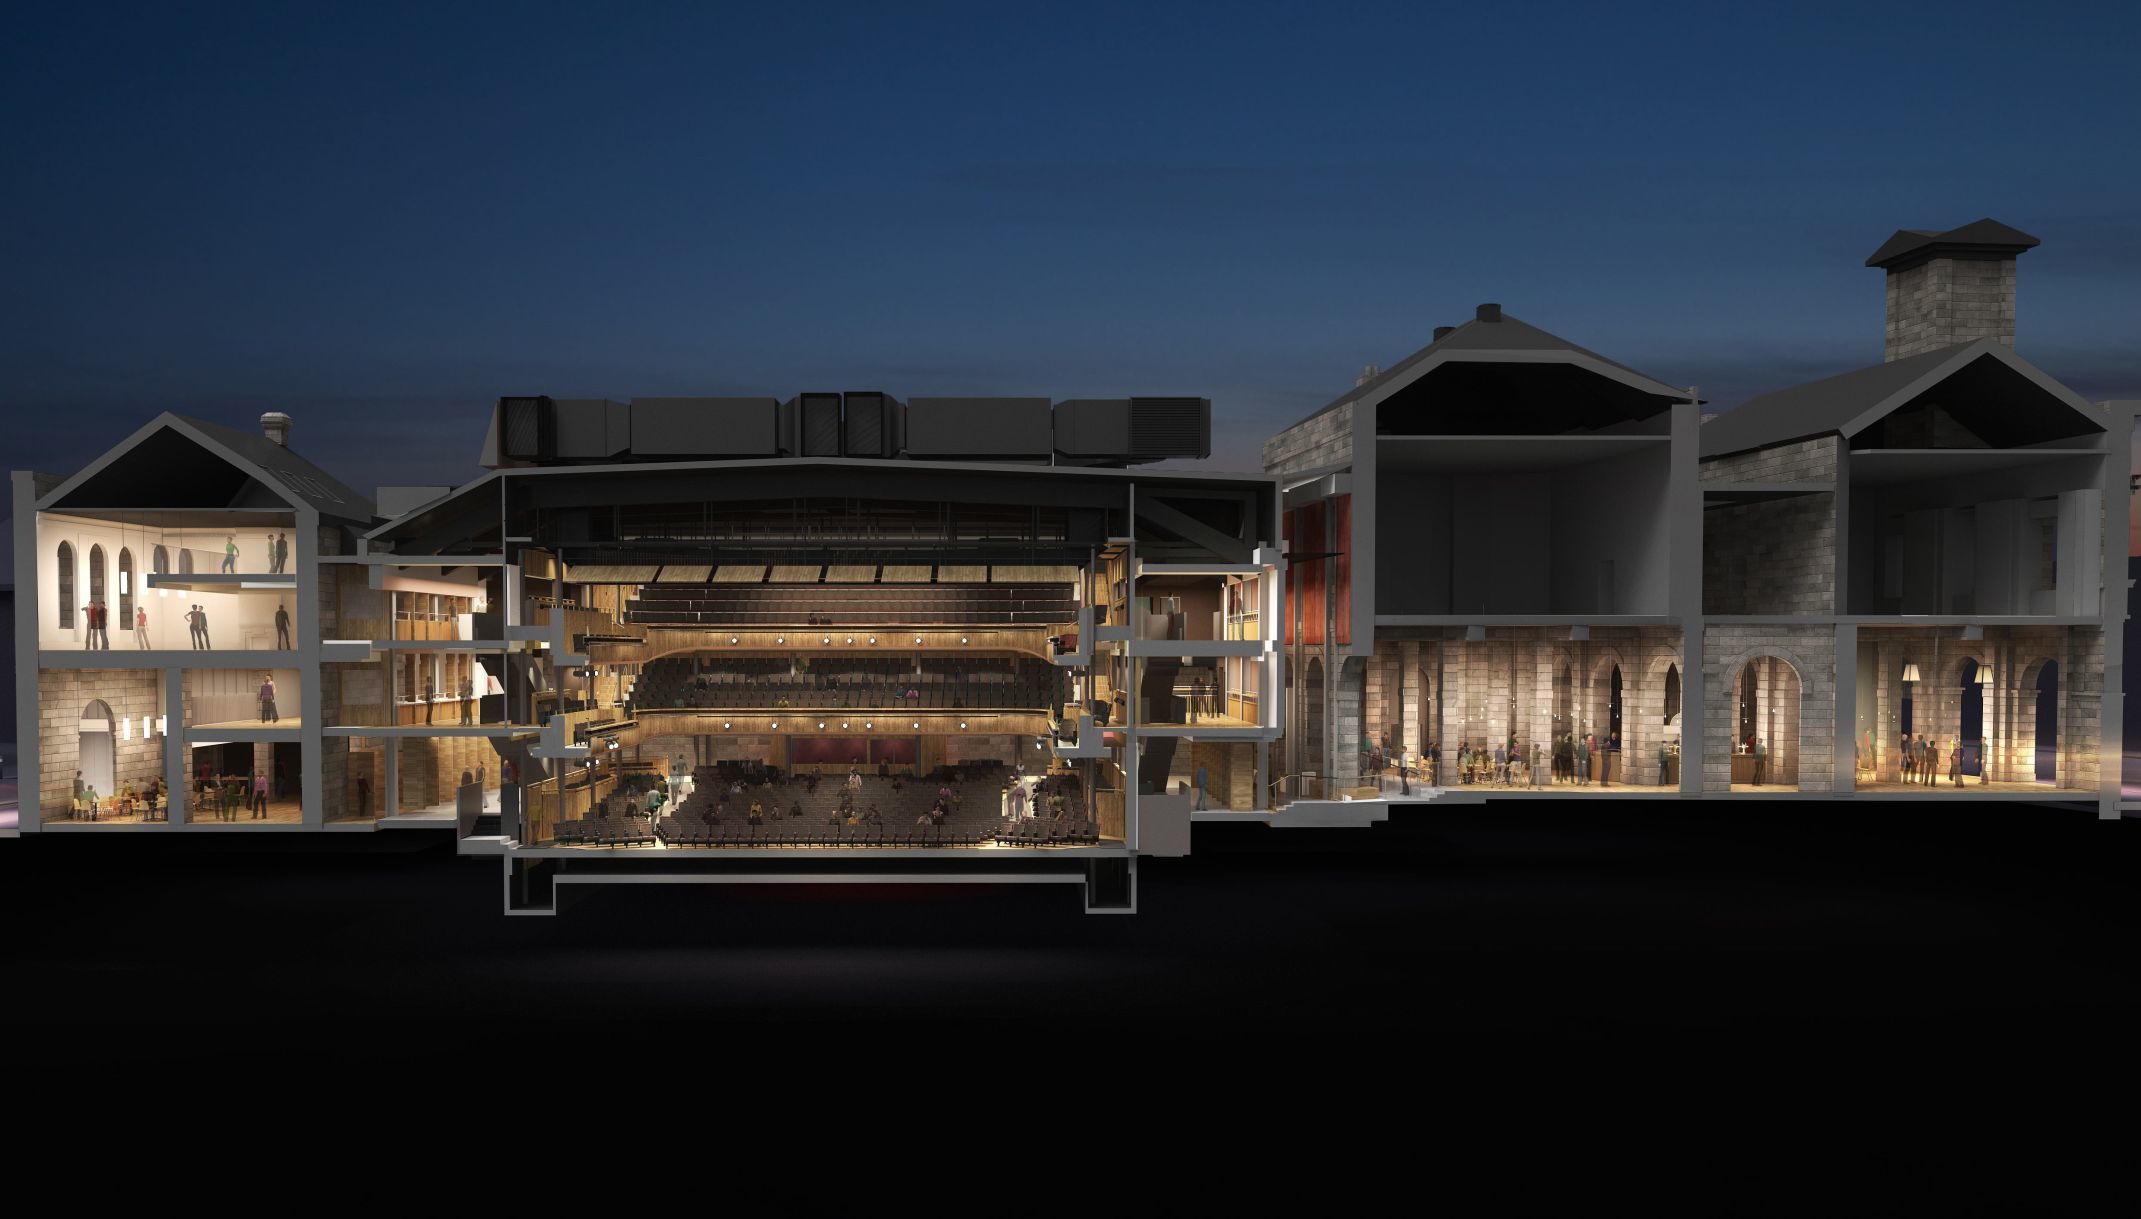 A cross section of how the new theatre should look